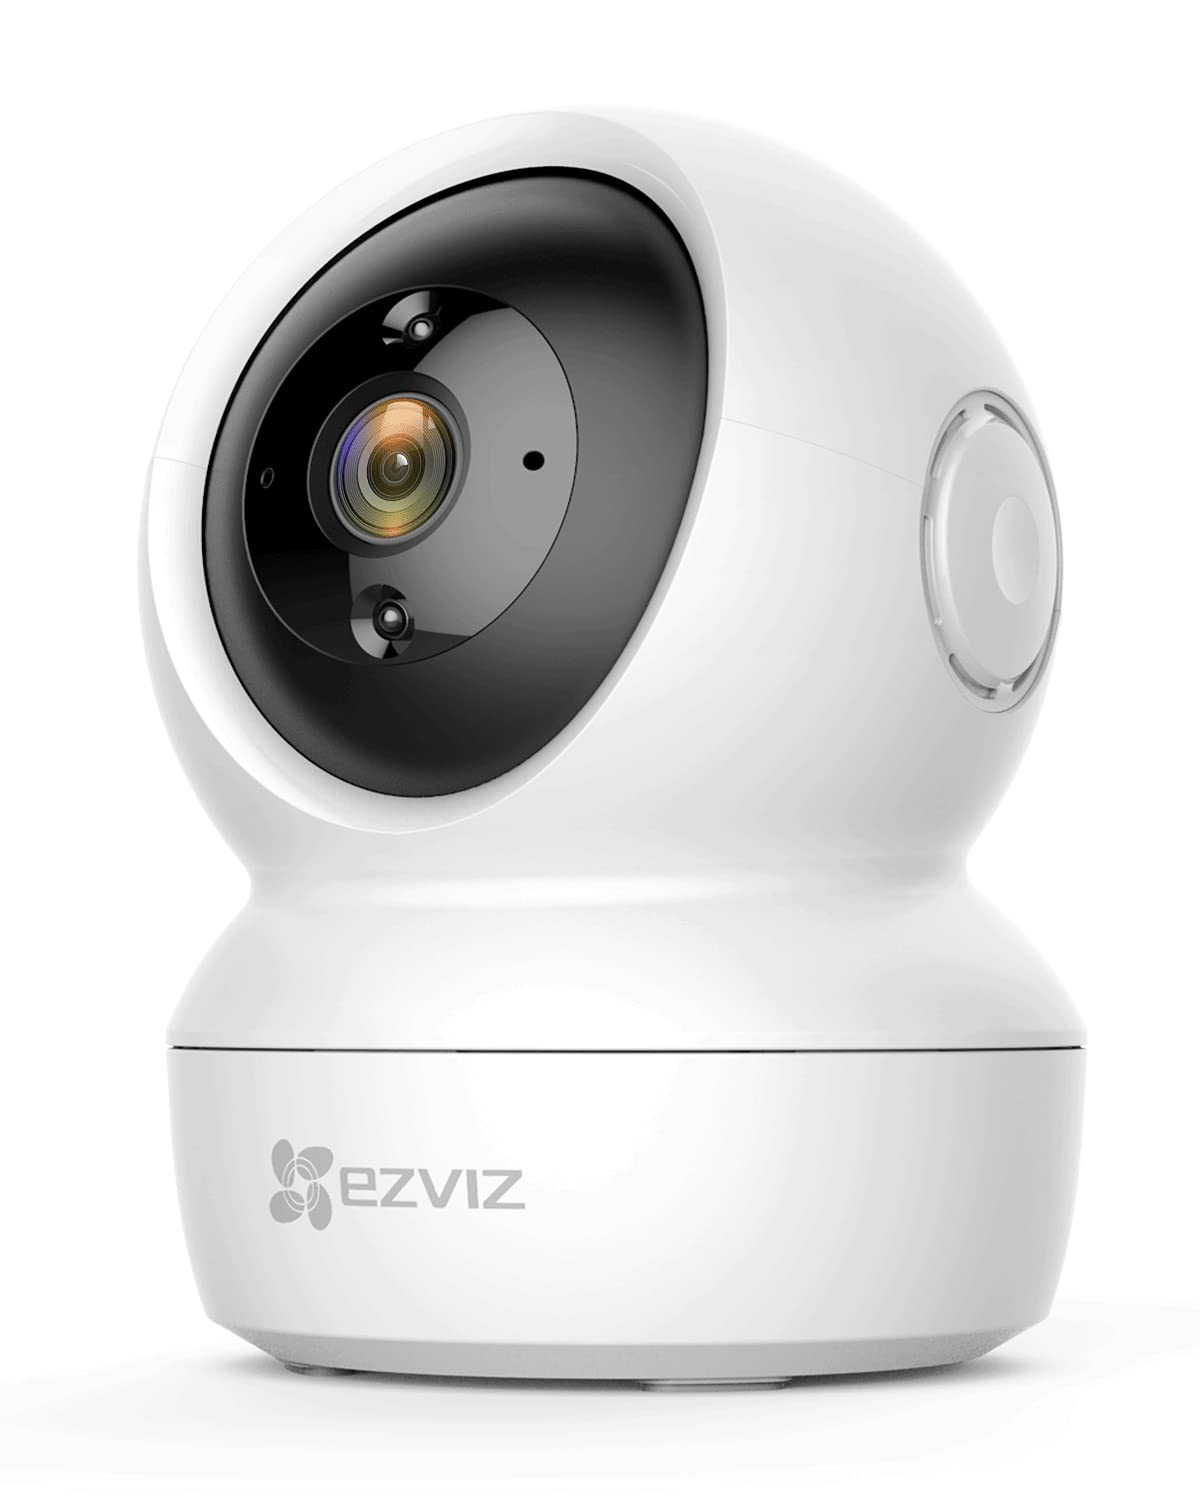 EZVIZ C6N Security Camera, 1080p CCTV Camera for Home, Wifi Indoor 360 Camera, Baby Monitor Surveillance Camera with Motion Detection, Smart Tracking, Two-Way Audio, Night Vision, Works With Alexa